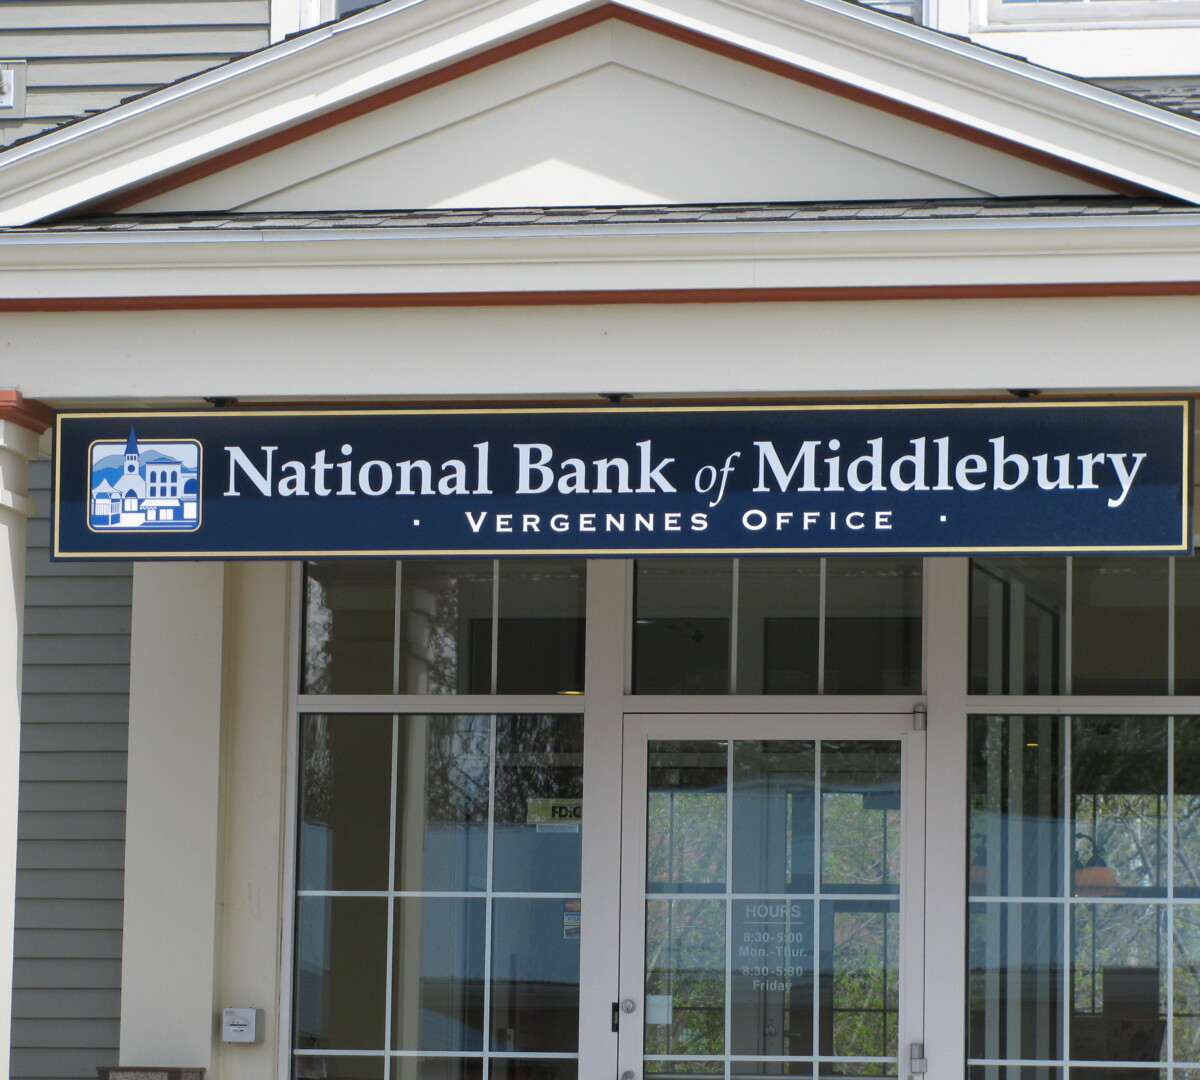 sign over door says National Bank of Middlebury Vergennes office